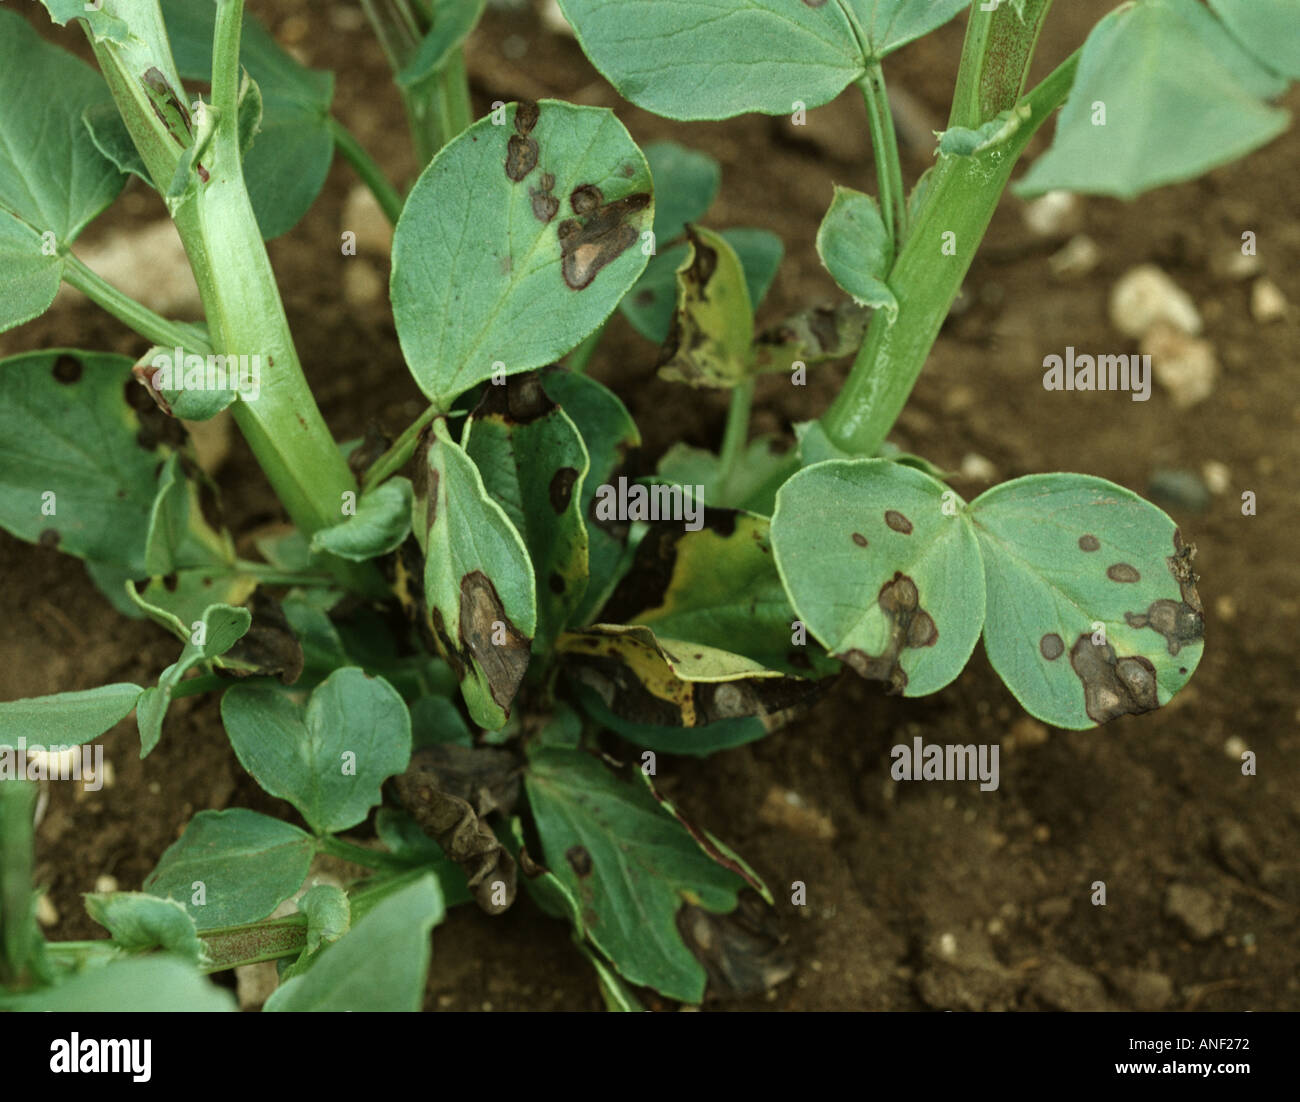 Leaf spot (Ascochyta fabae) lesions on young broad or field bean Vicia faba plant Stock Photo